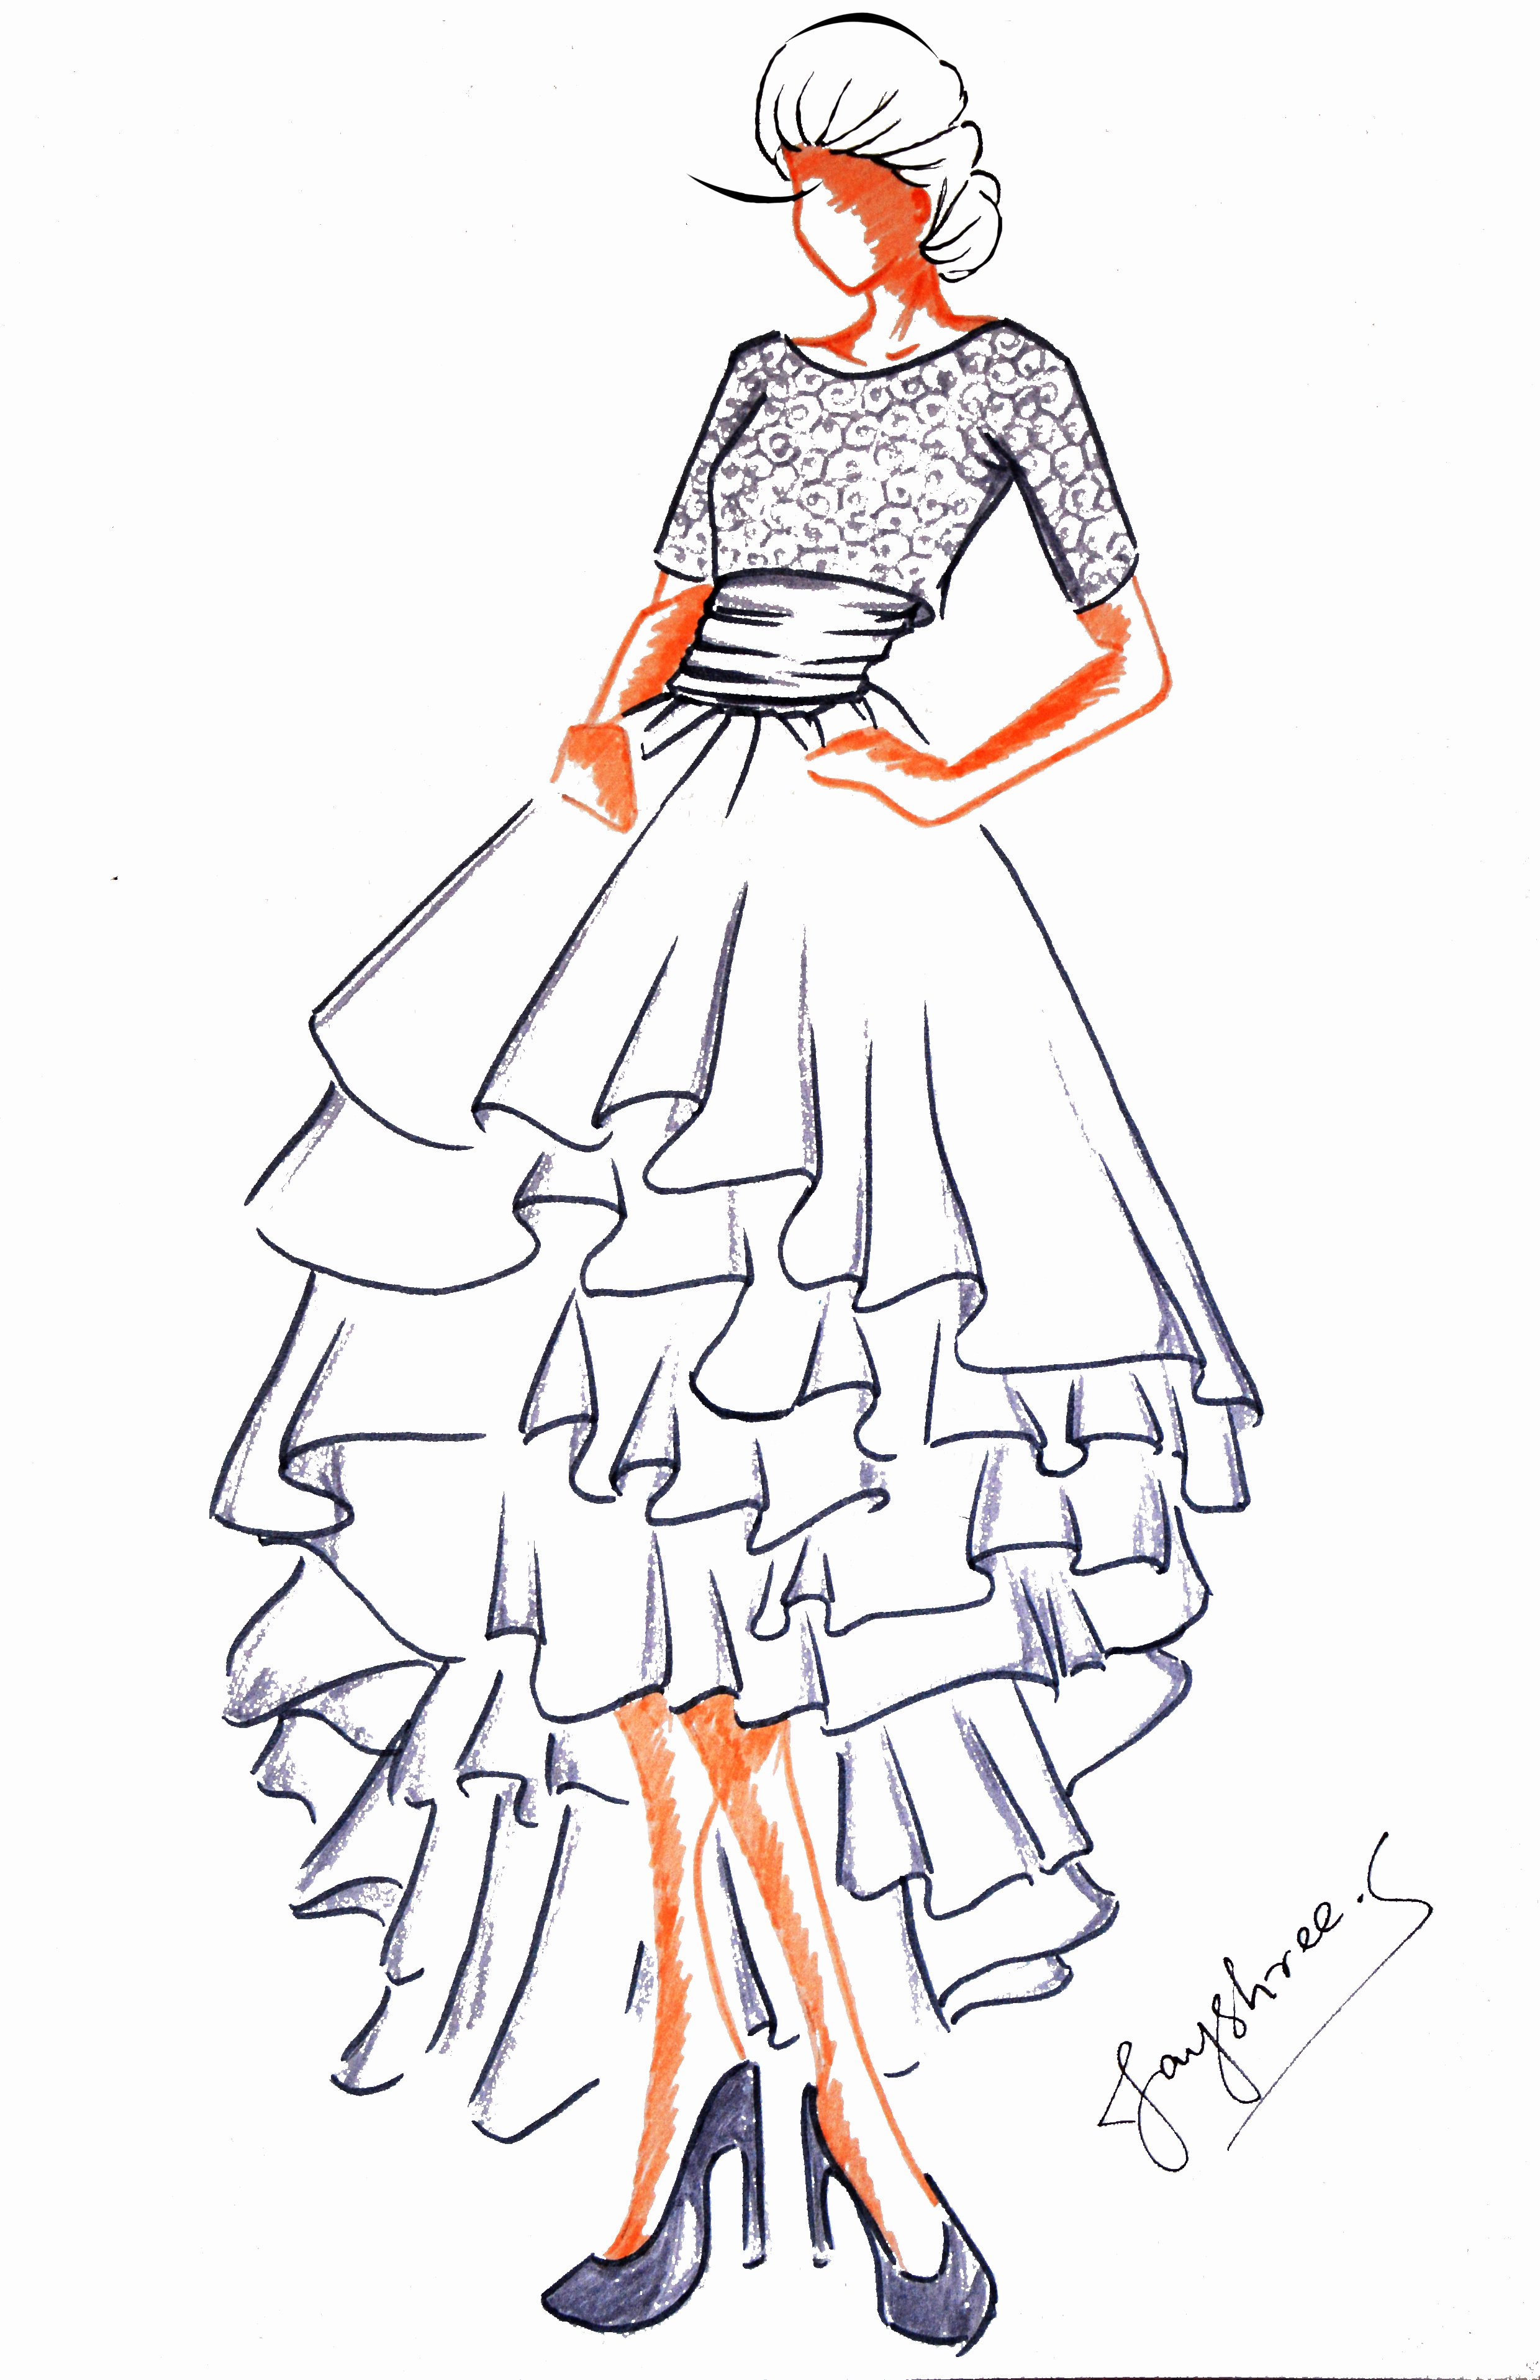 Dress Sketches for Fashion Designing Lovely Art Wardrobe – Fashion Illustrations and Other Art forms